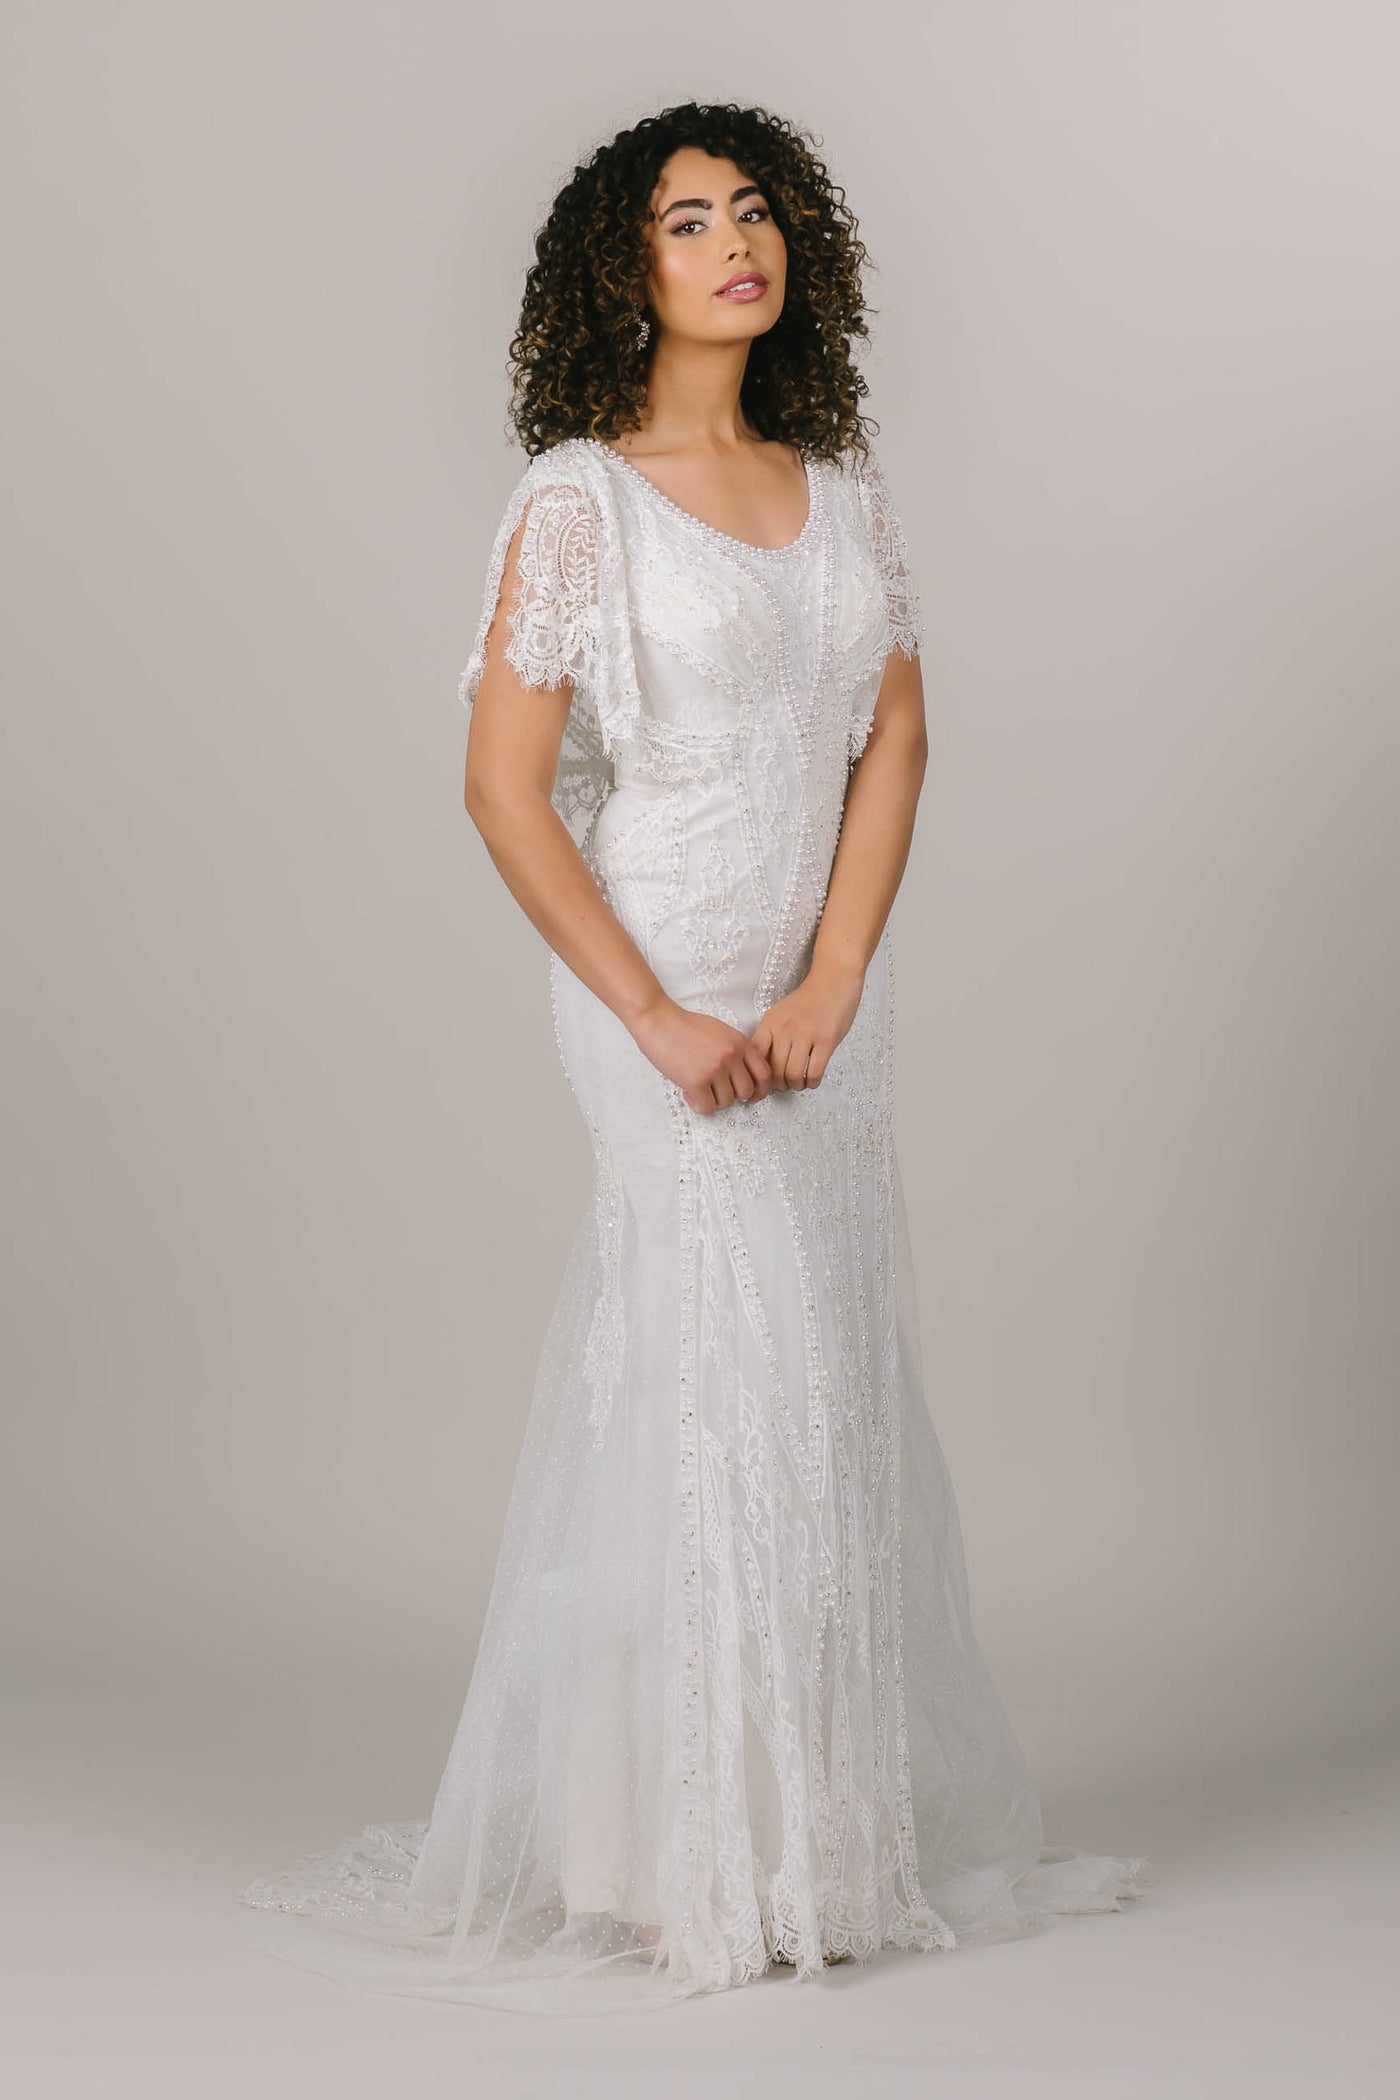 This is an alternate front shot of a modest wedding dress with fun flutter sleeves and intricate beading details